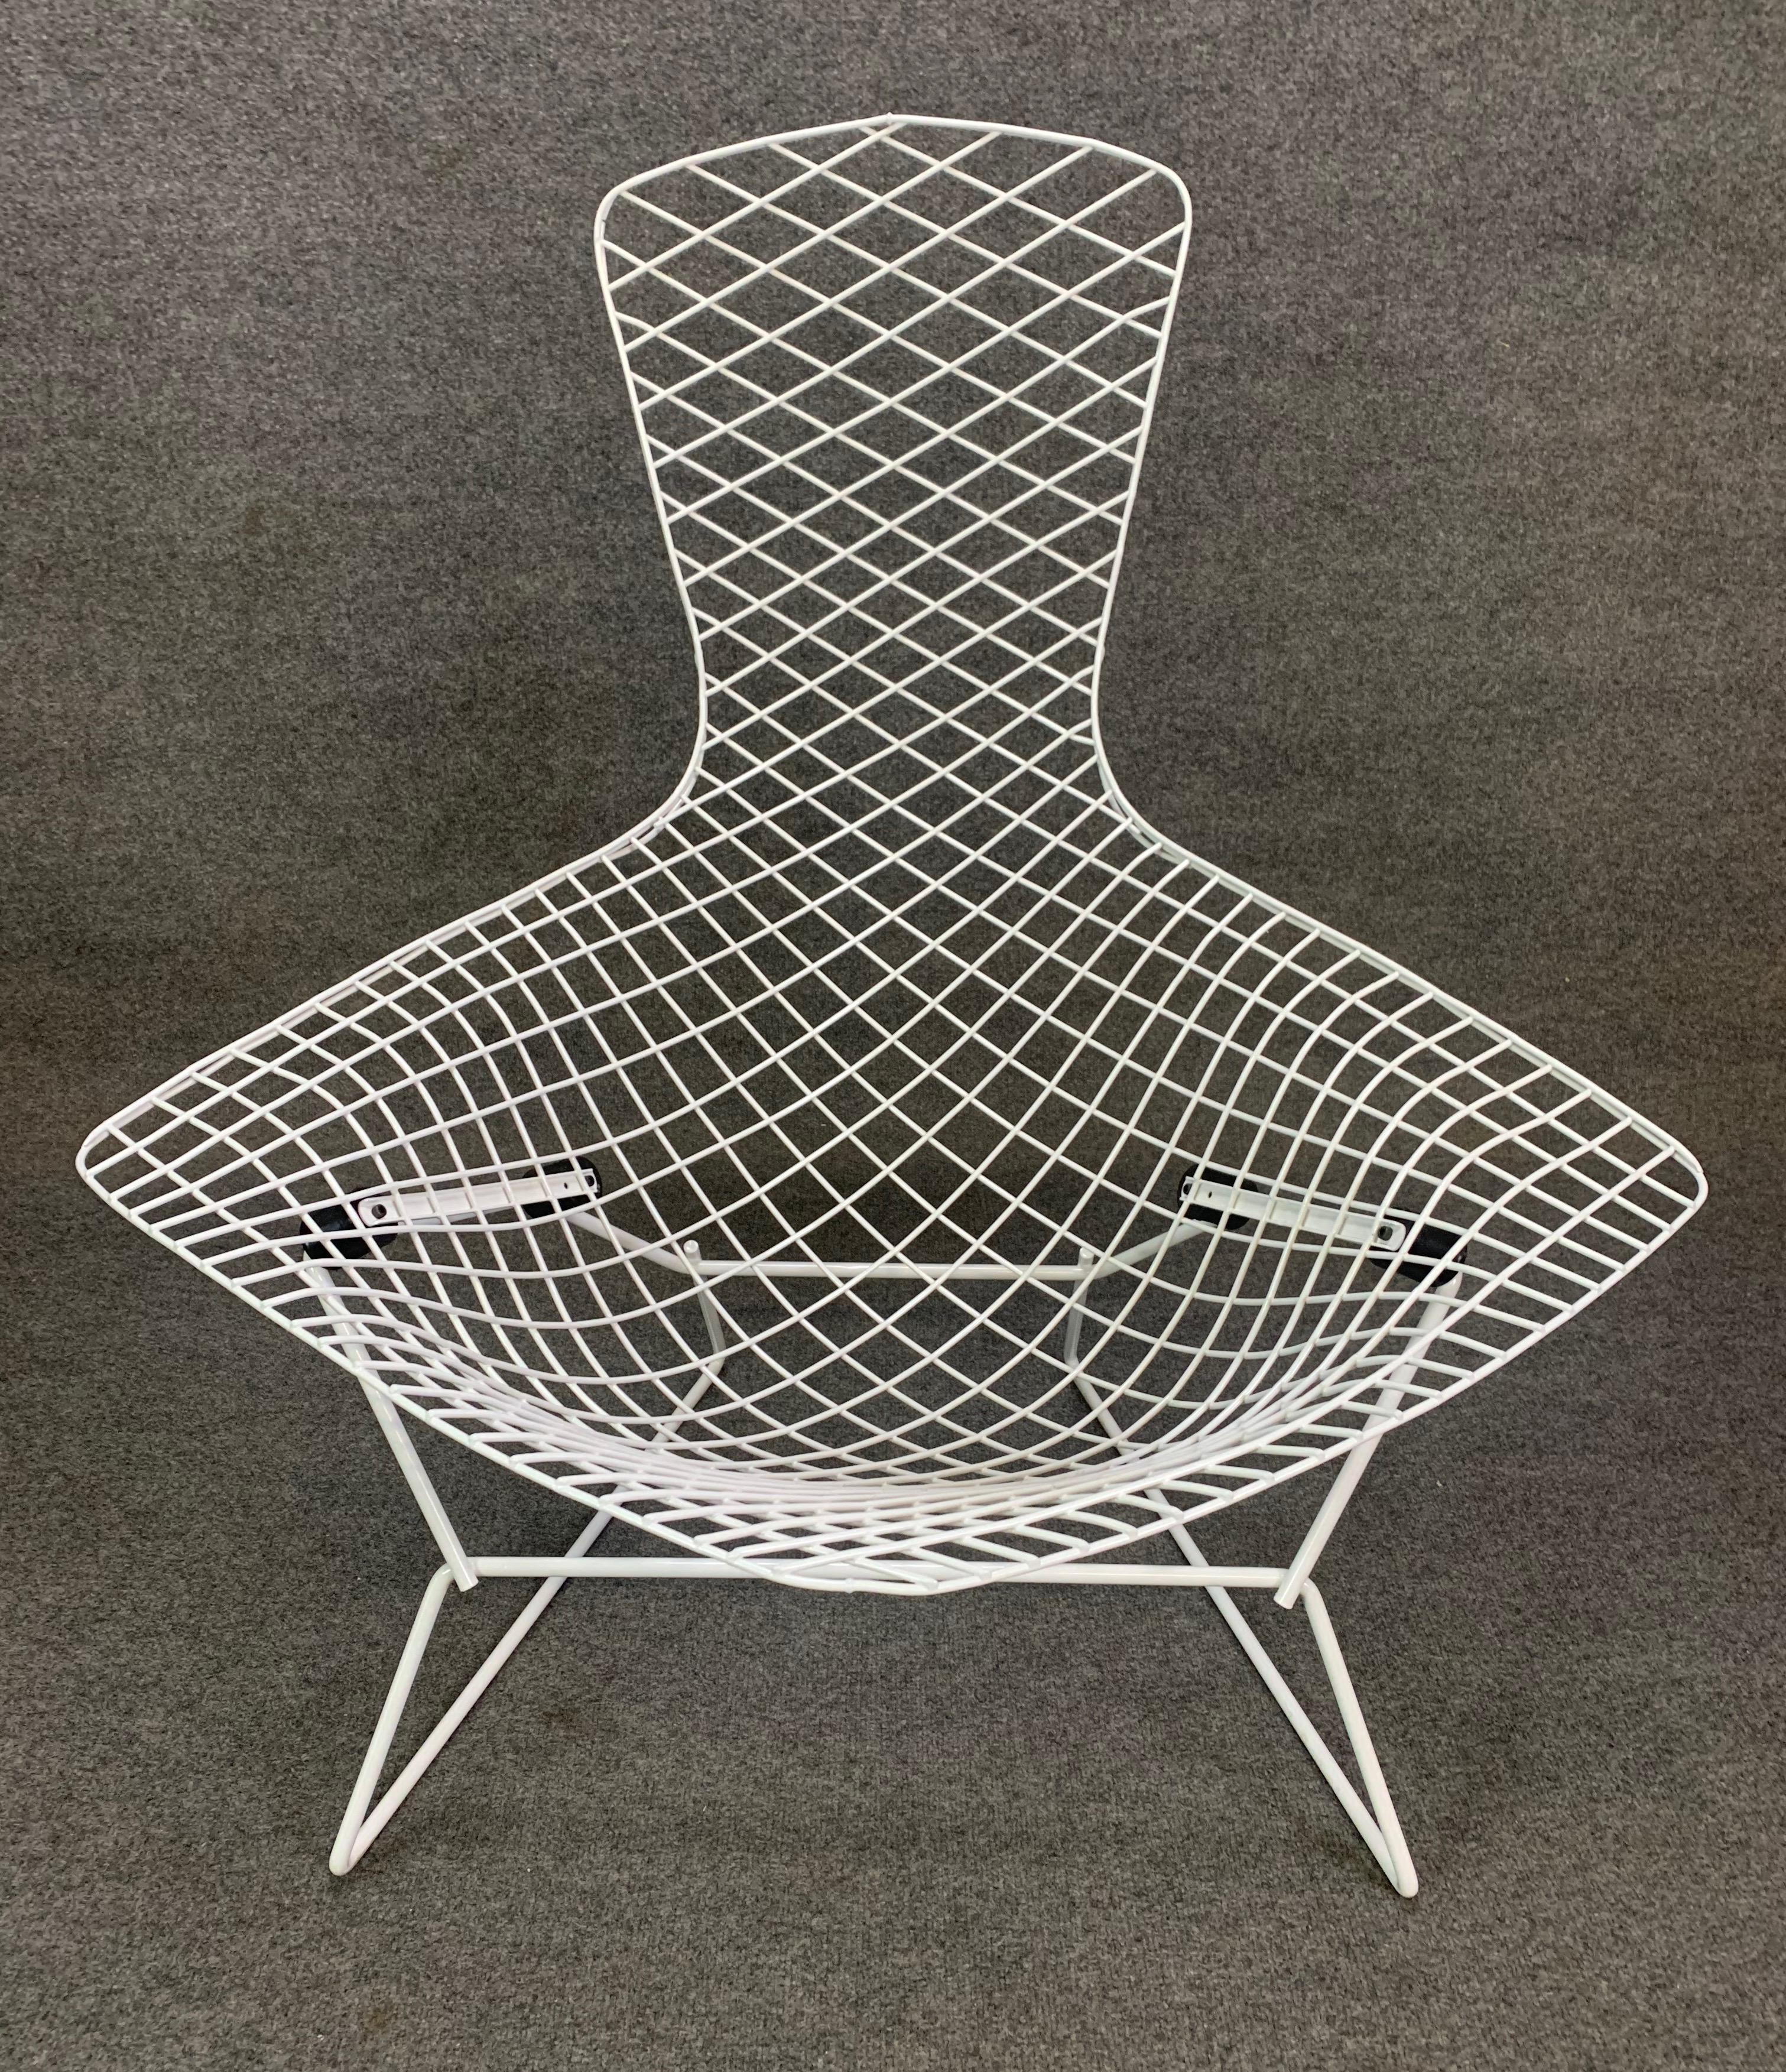 Here is one of the most fascinating sculptural design of artist Harry Bertoia: The 